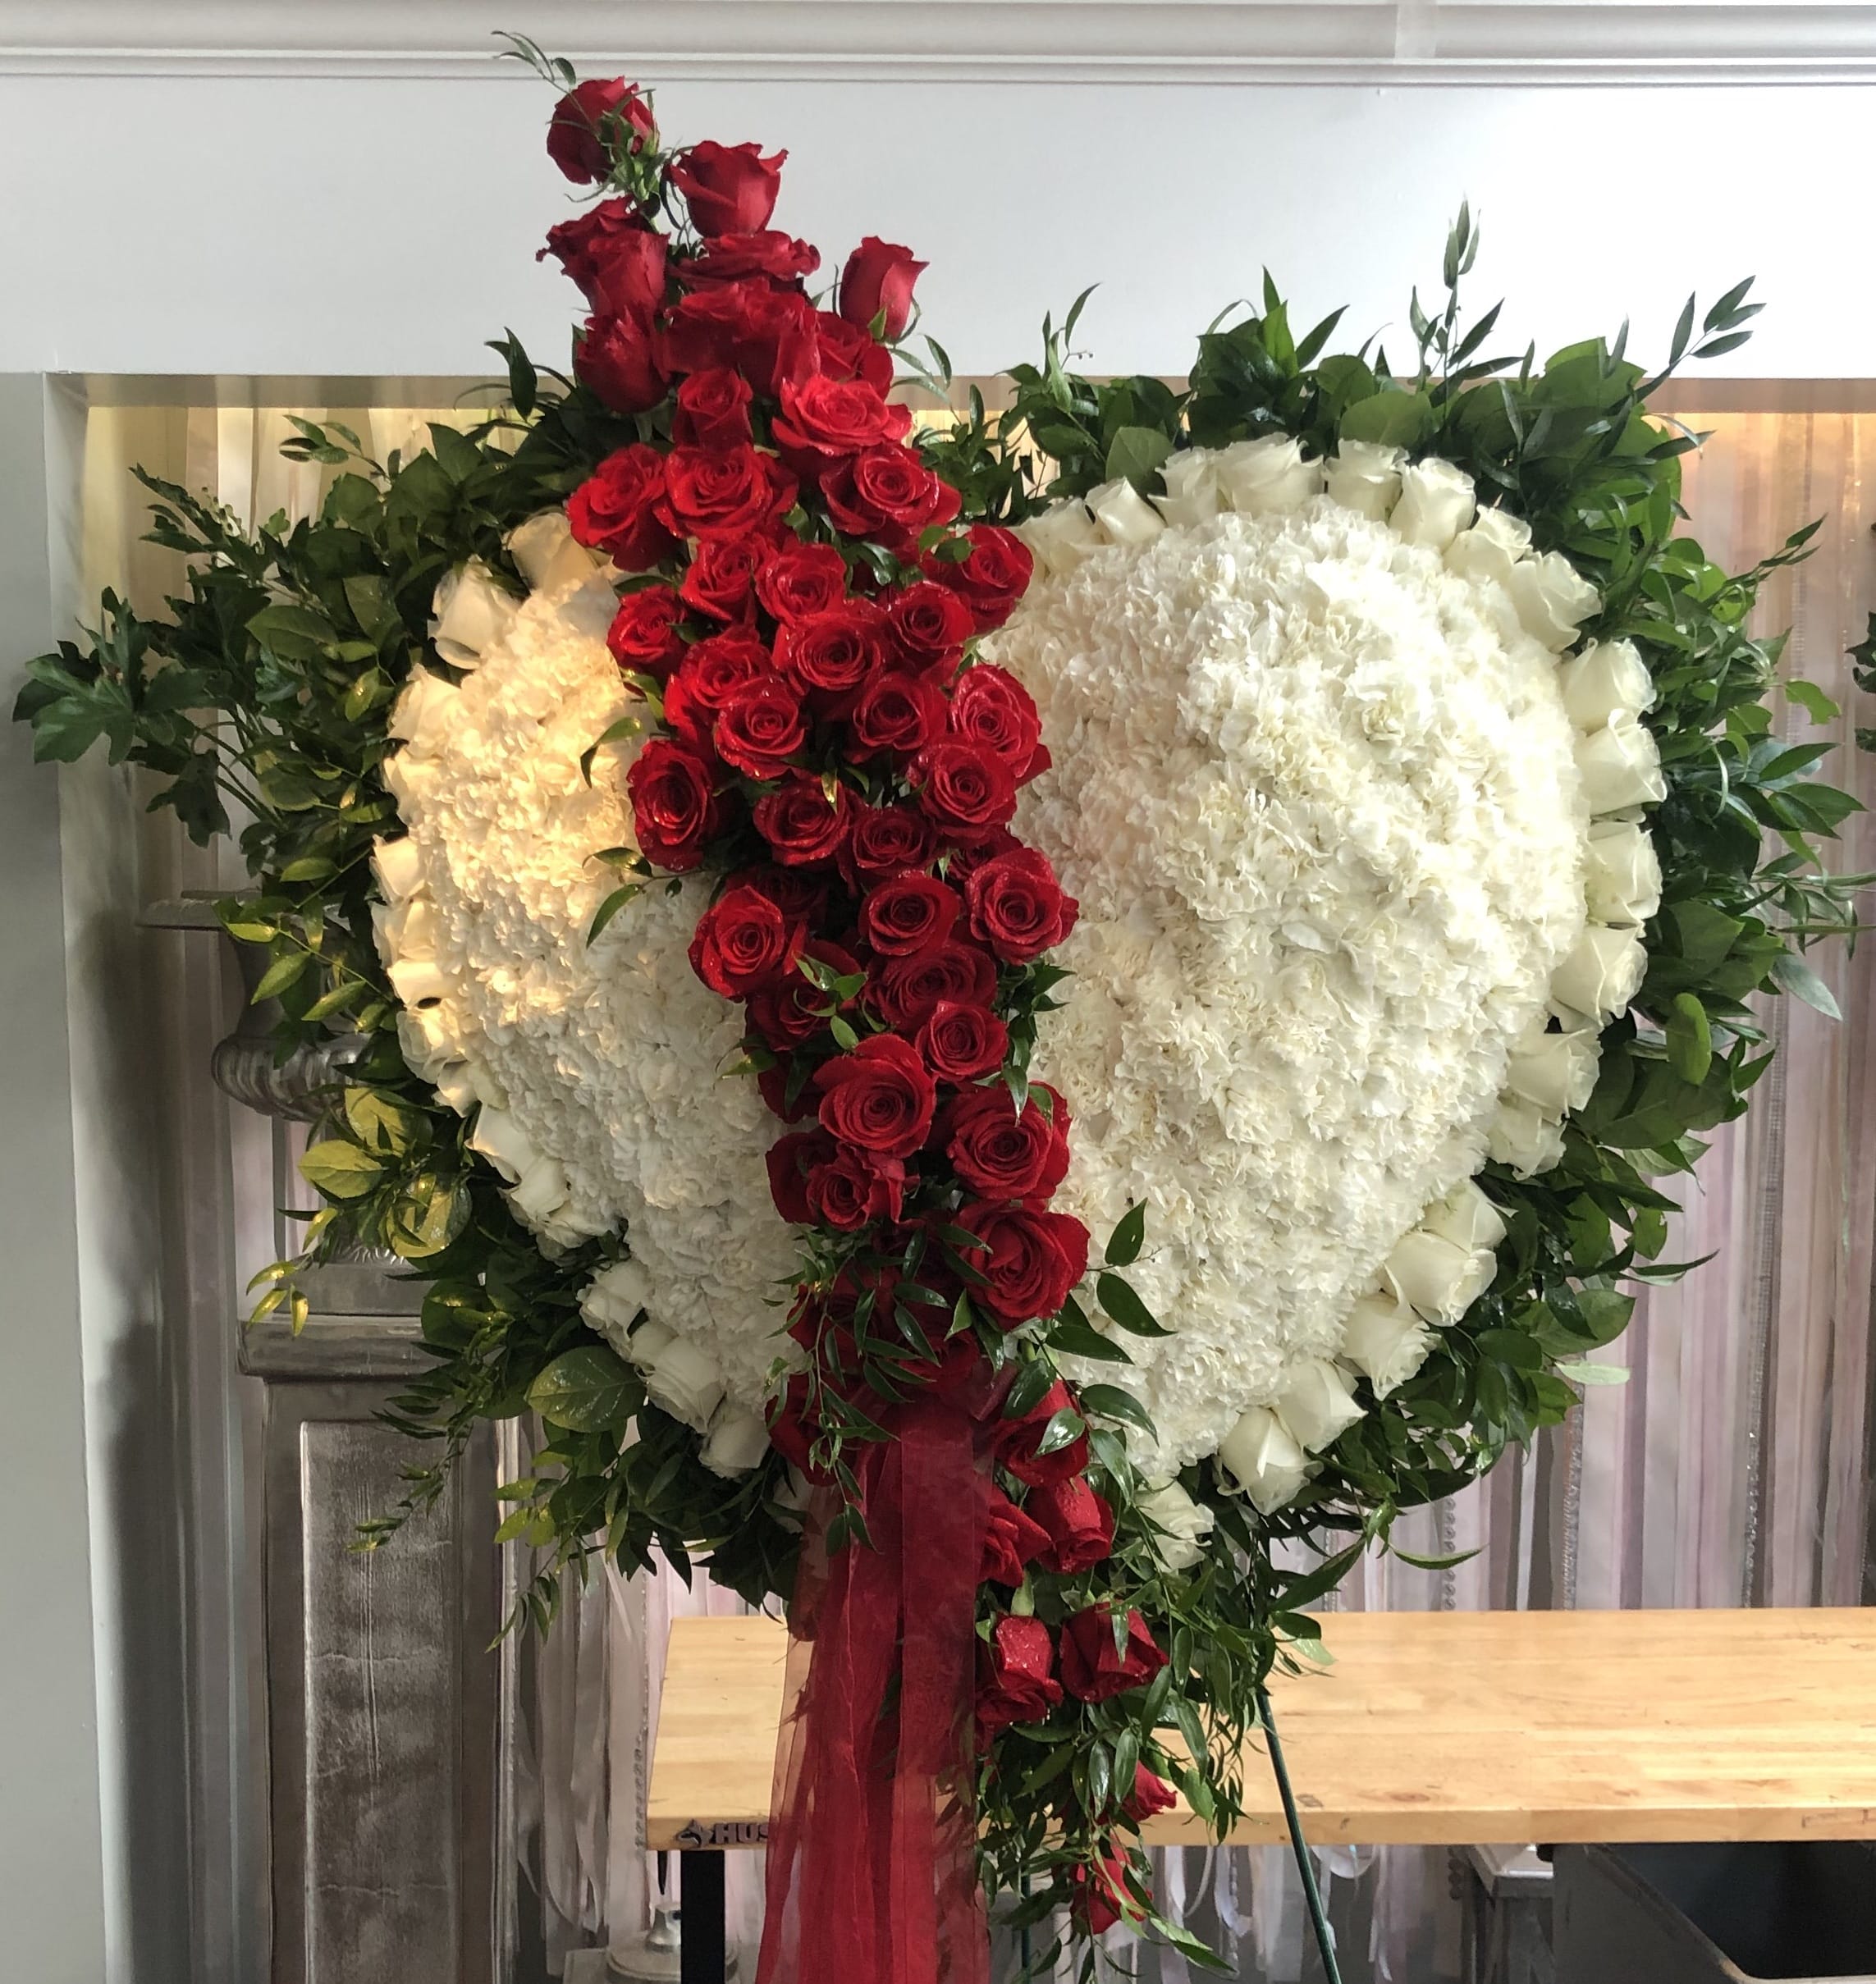 Red and White Wreath Funeral Wreath in Sonora, CA - BEAR'S GARDEN FLORIST